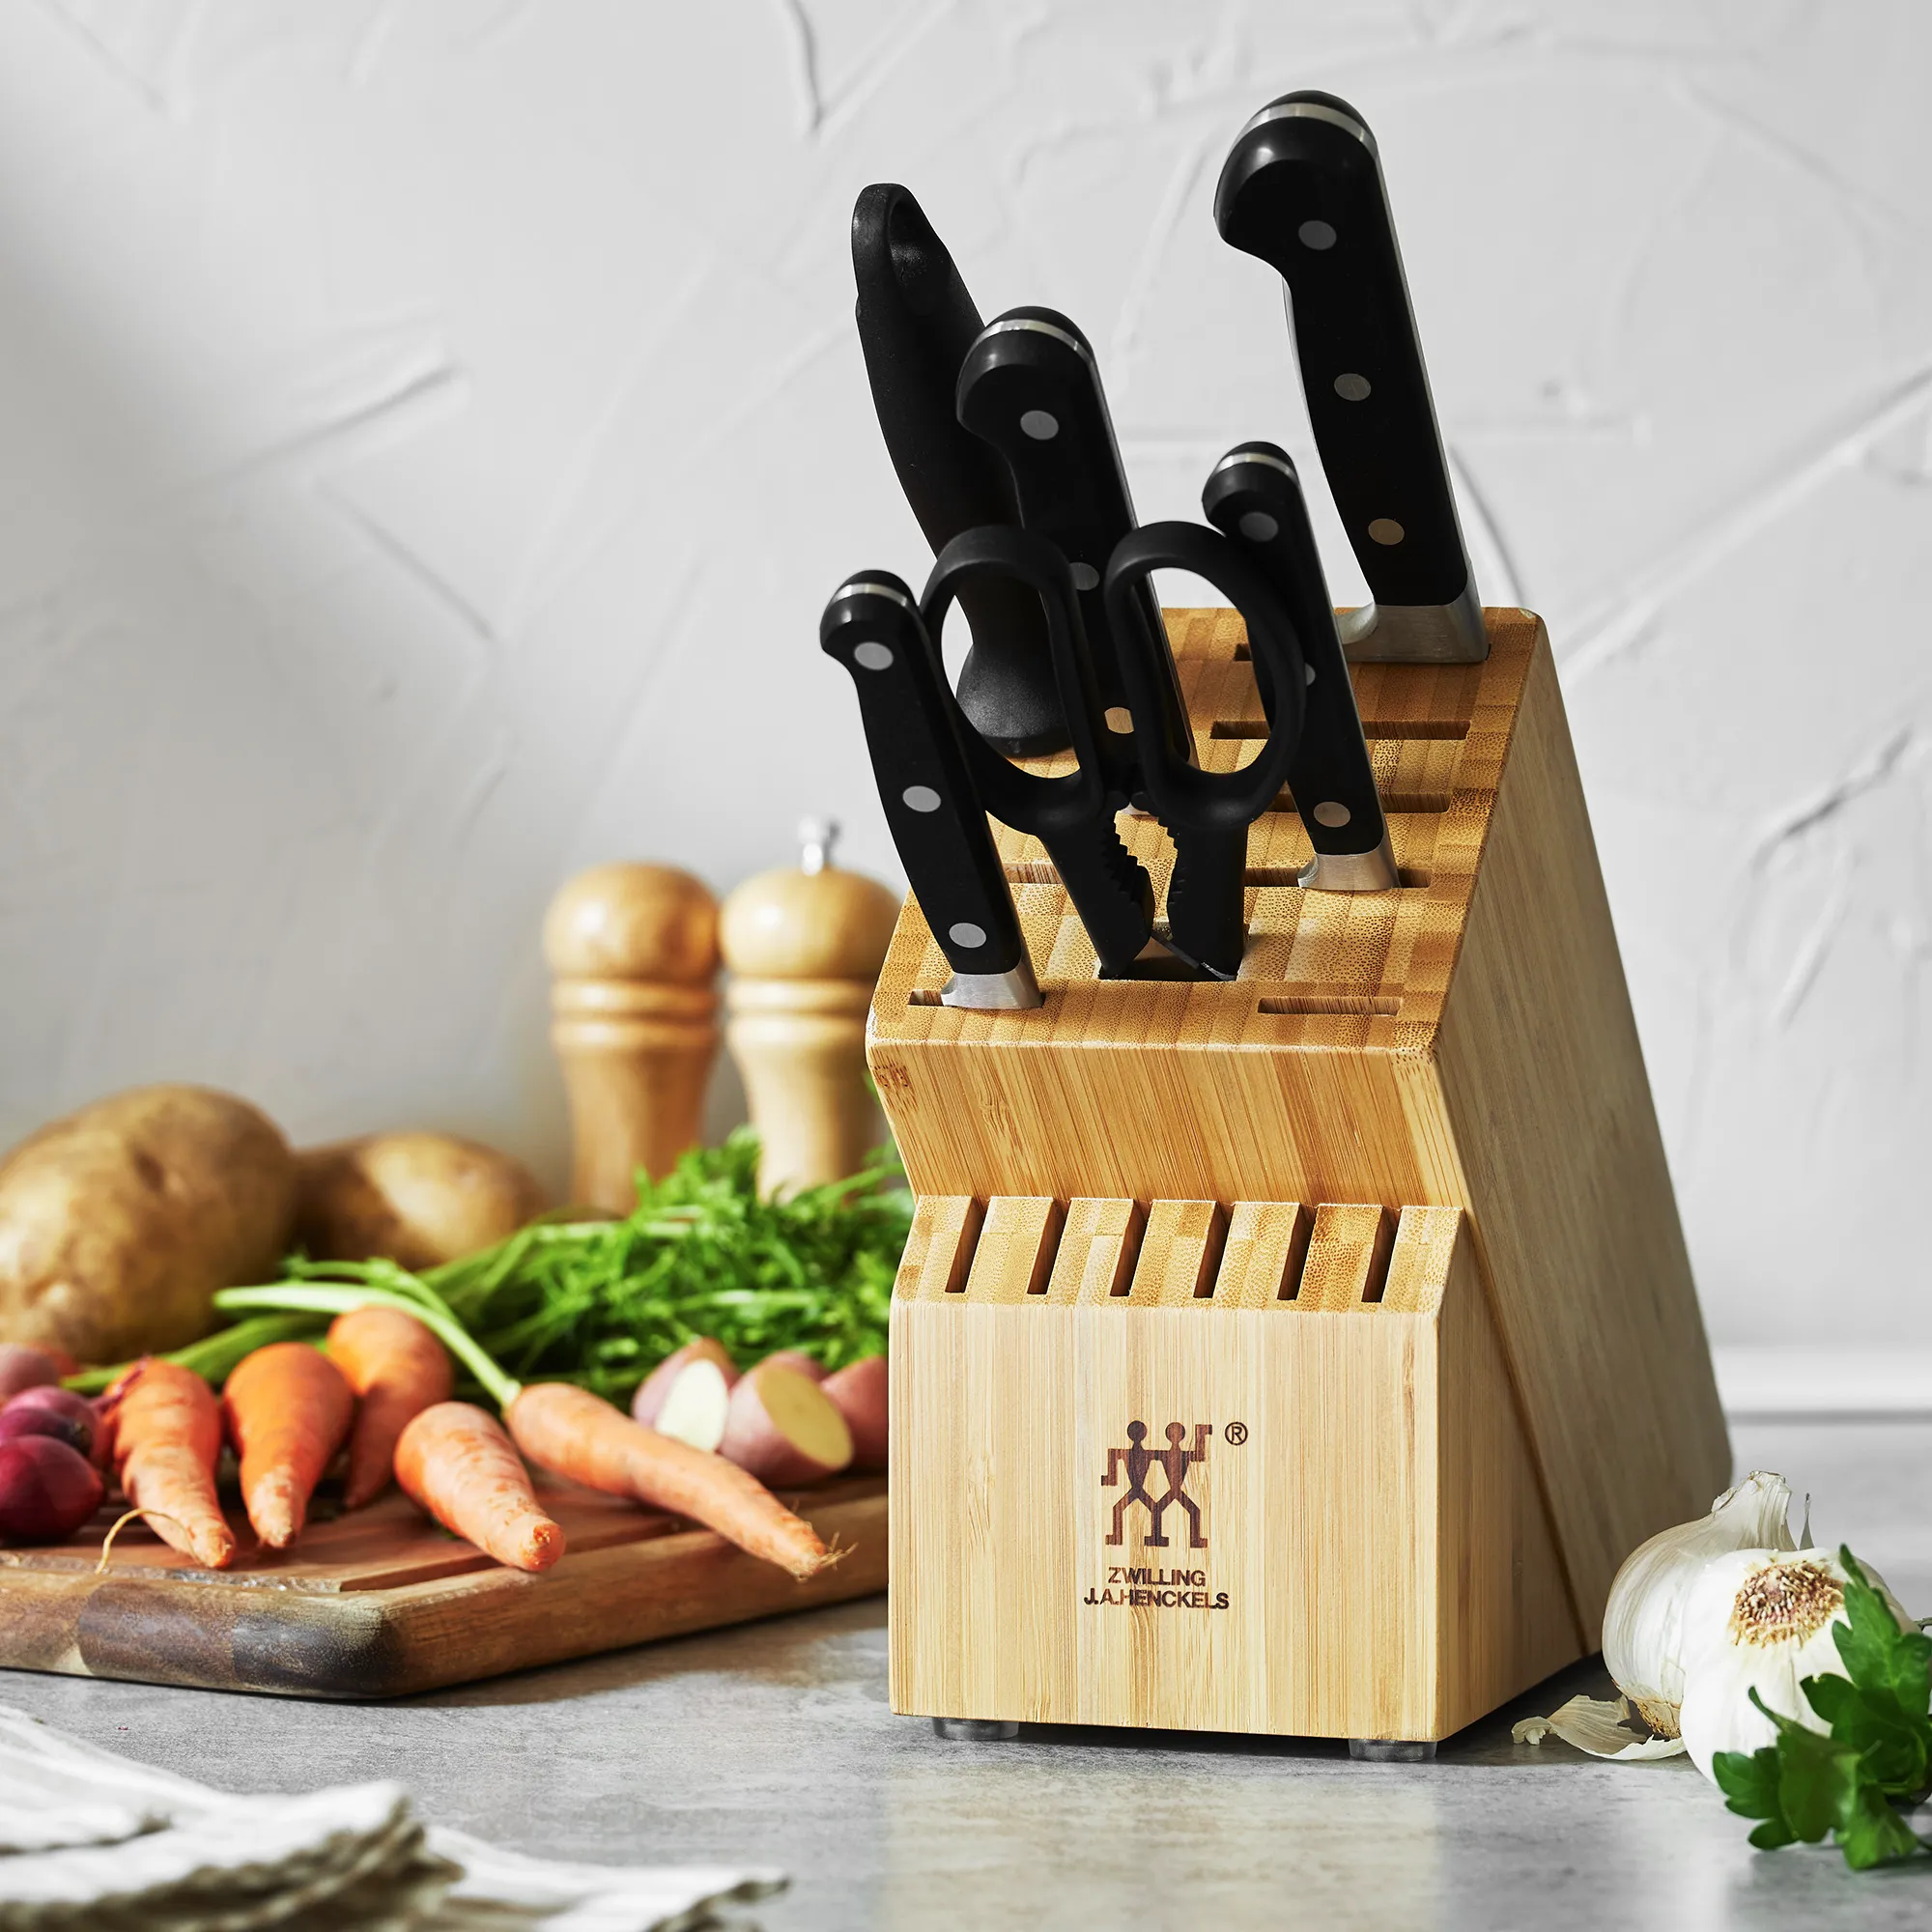 https://www.homethreads.com/files/zwilling/35666-000-zwilling-professional-s-knife-set-with-block-chefs-knife-serrated-utility-knife-7-piece-black-4.webp